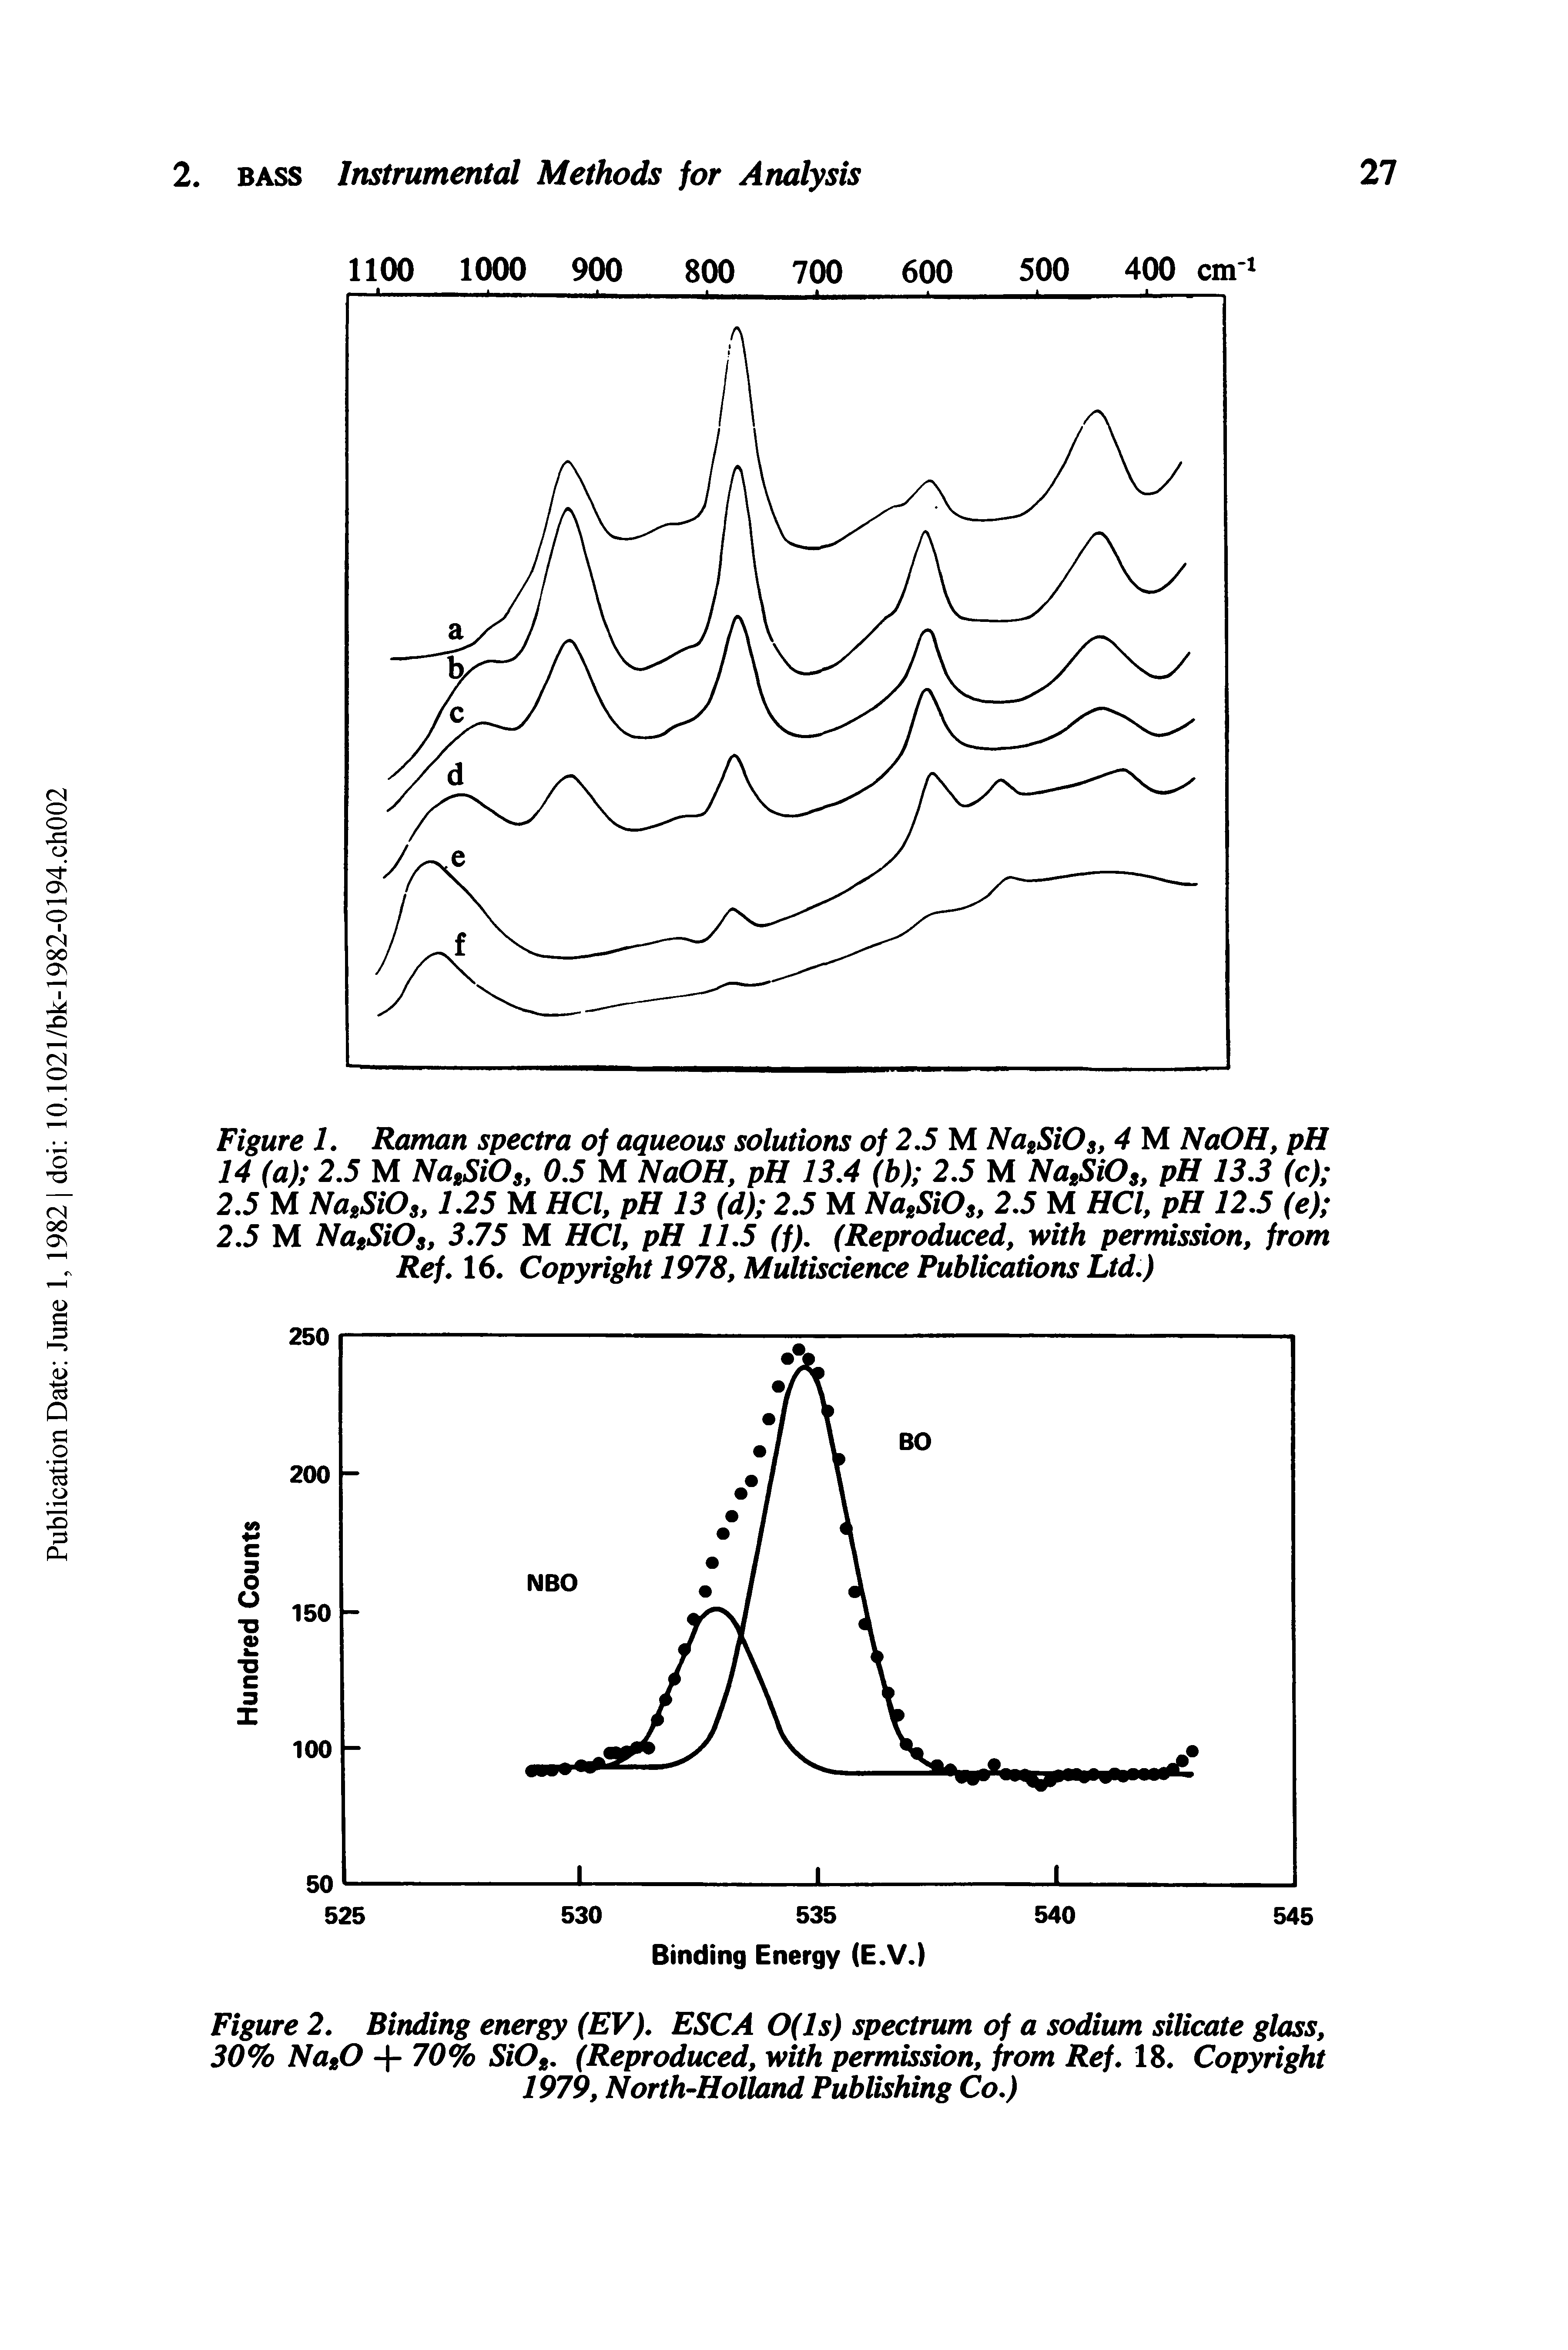 Figure 2. Binding energy (EV). ESC A 0(ls) spectrum of a sodium silicate glass, 30% Na 0 + 70% 5/0. (Reproduced, with permission, from Ref. 18. Copyright 1979, North-Holland Publishing Co.)...